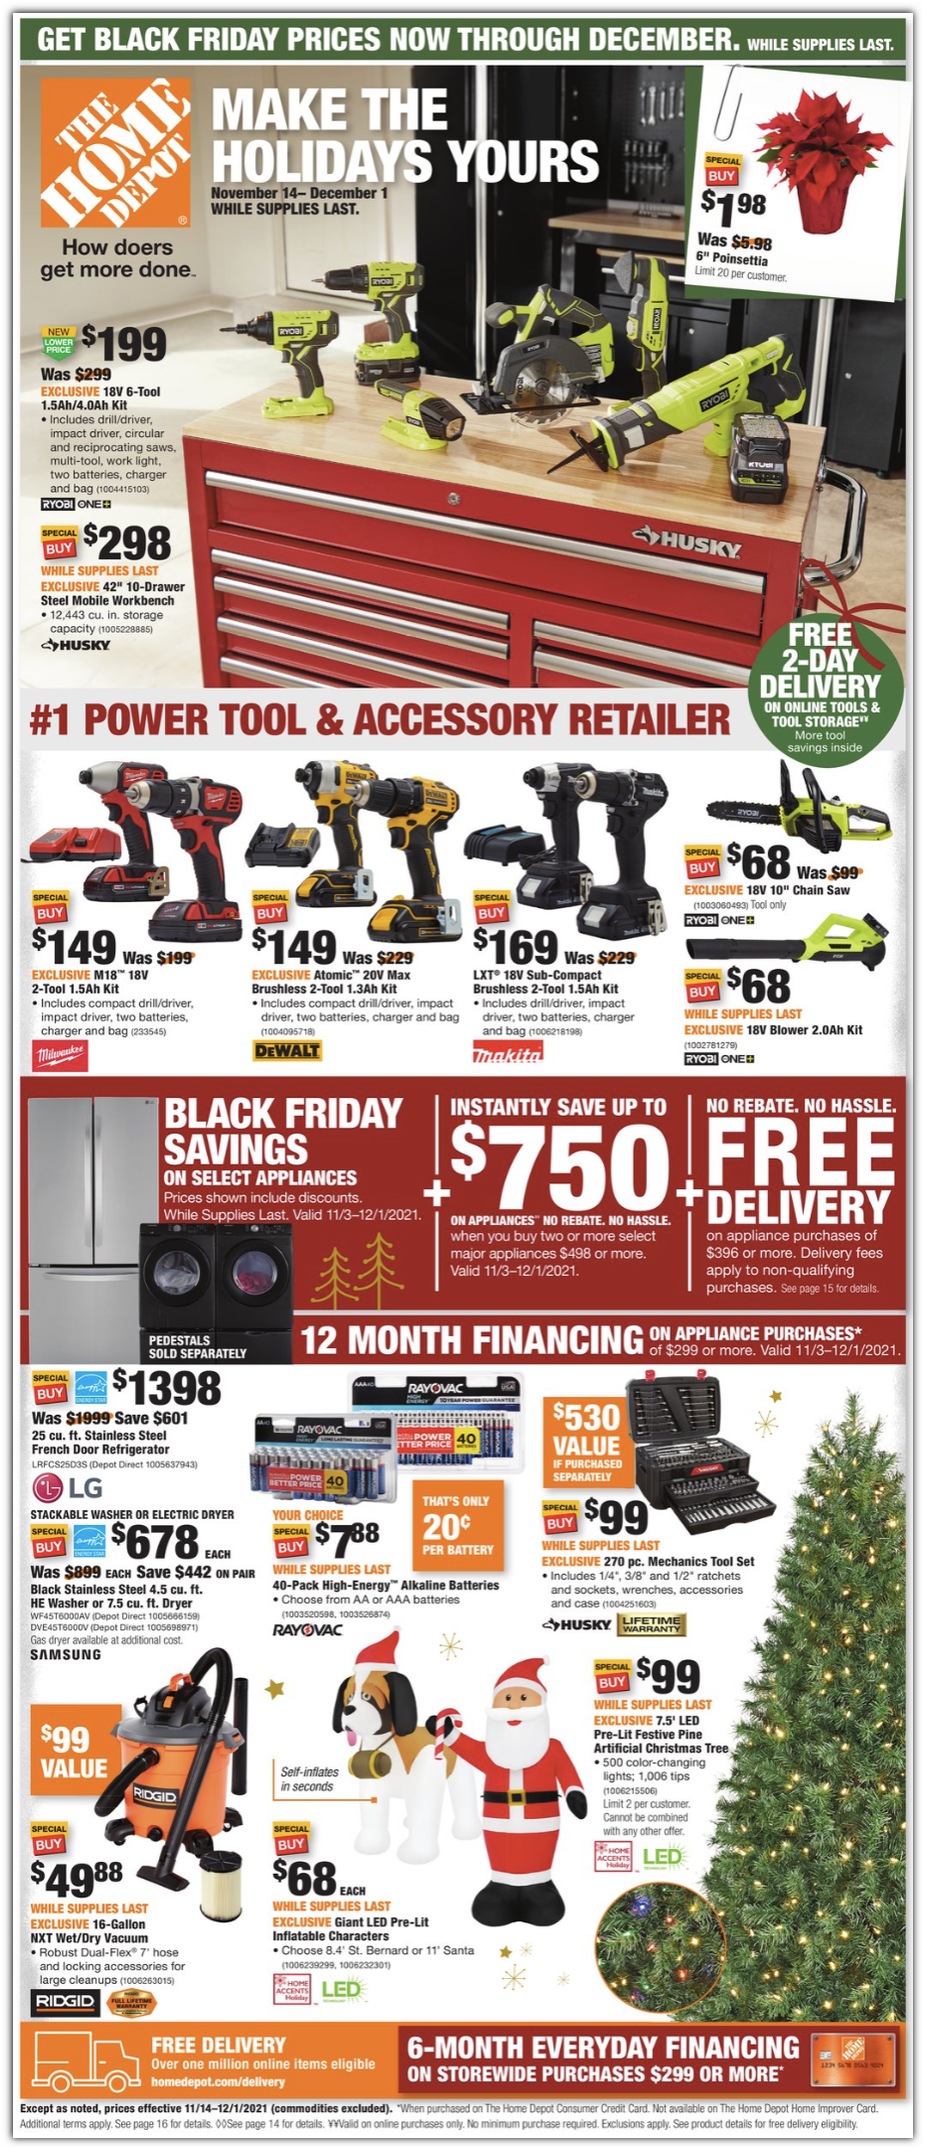 Specials & Offers at The Home Depot